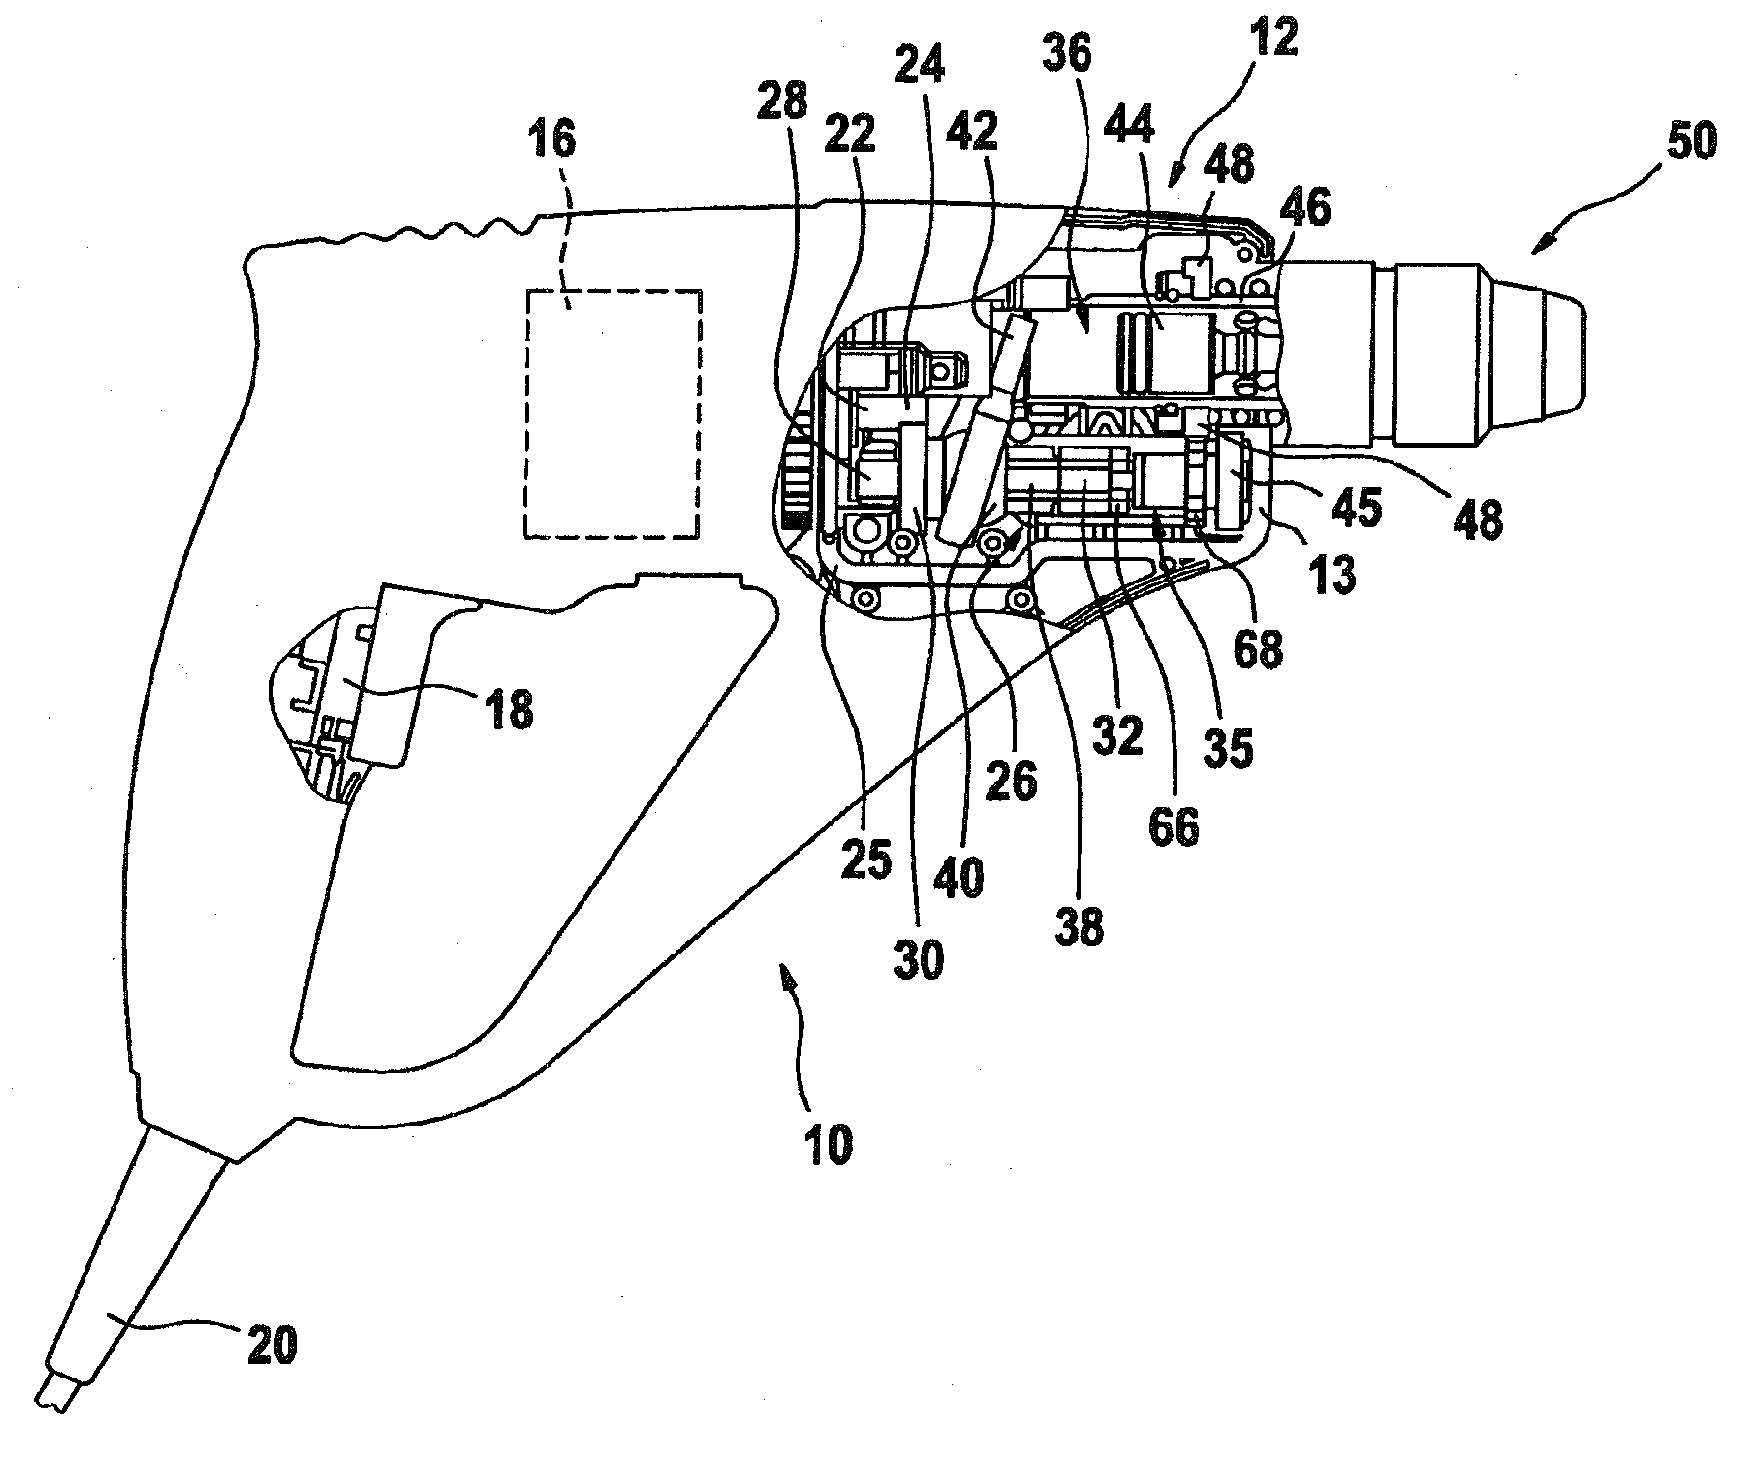 Drill Hammer With Three Modes of Operation